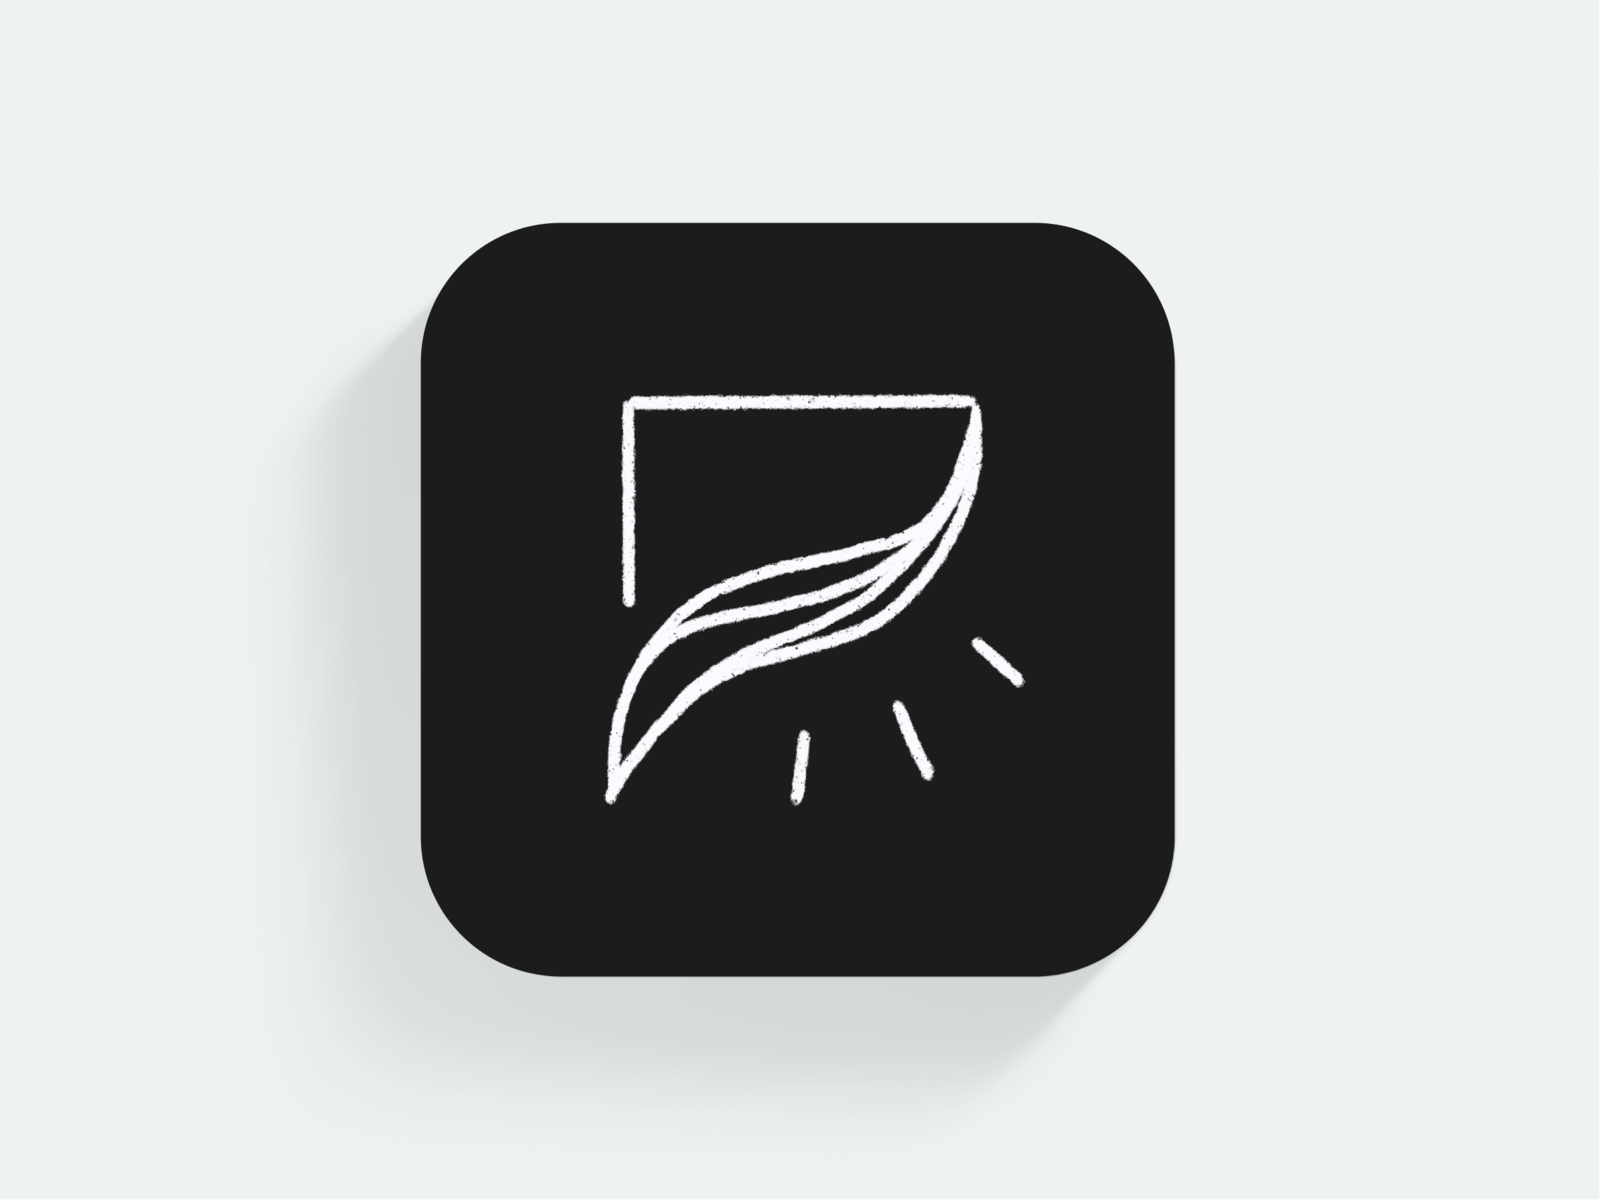 procreate-app-icon-submission-by-steffi-m-c-on-dribbble